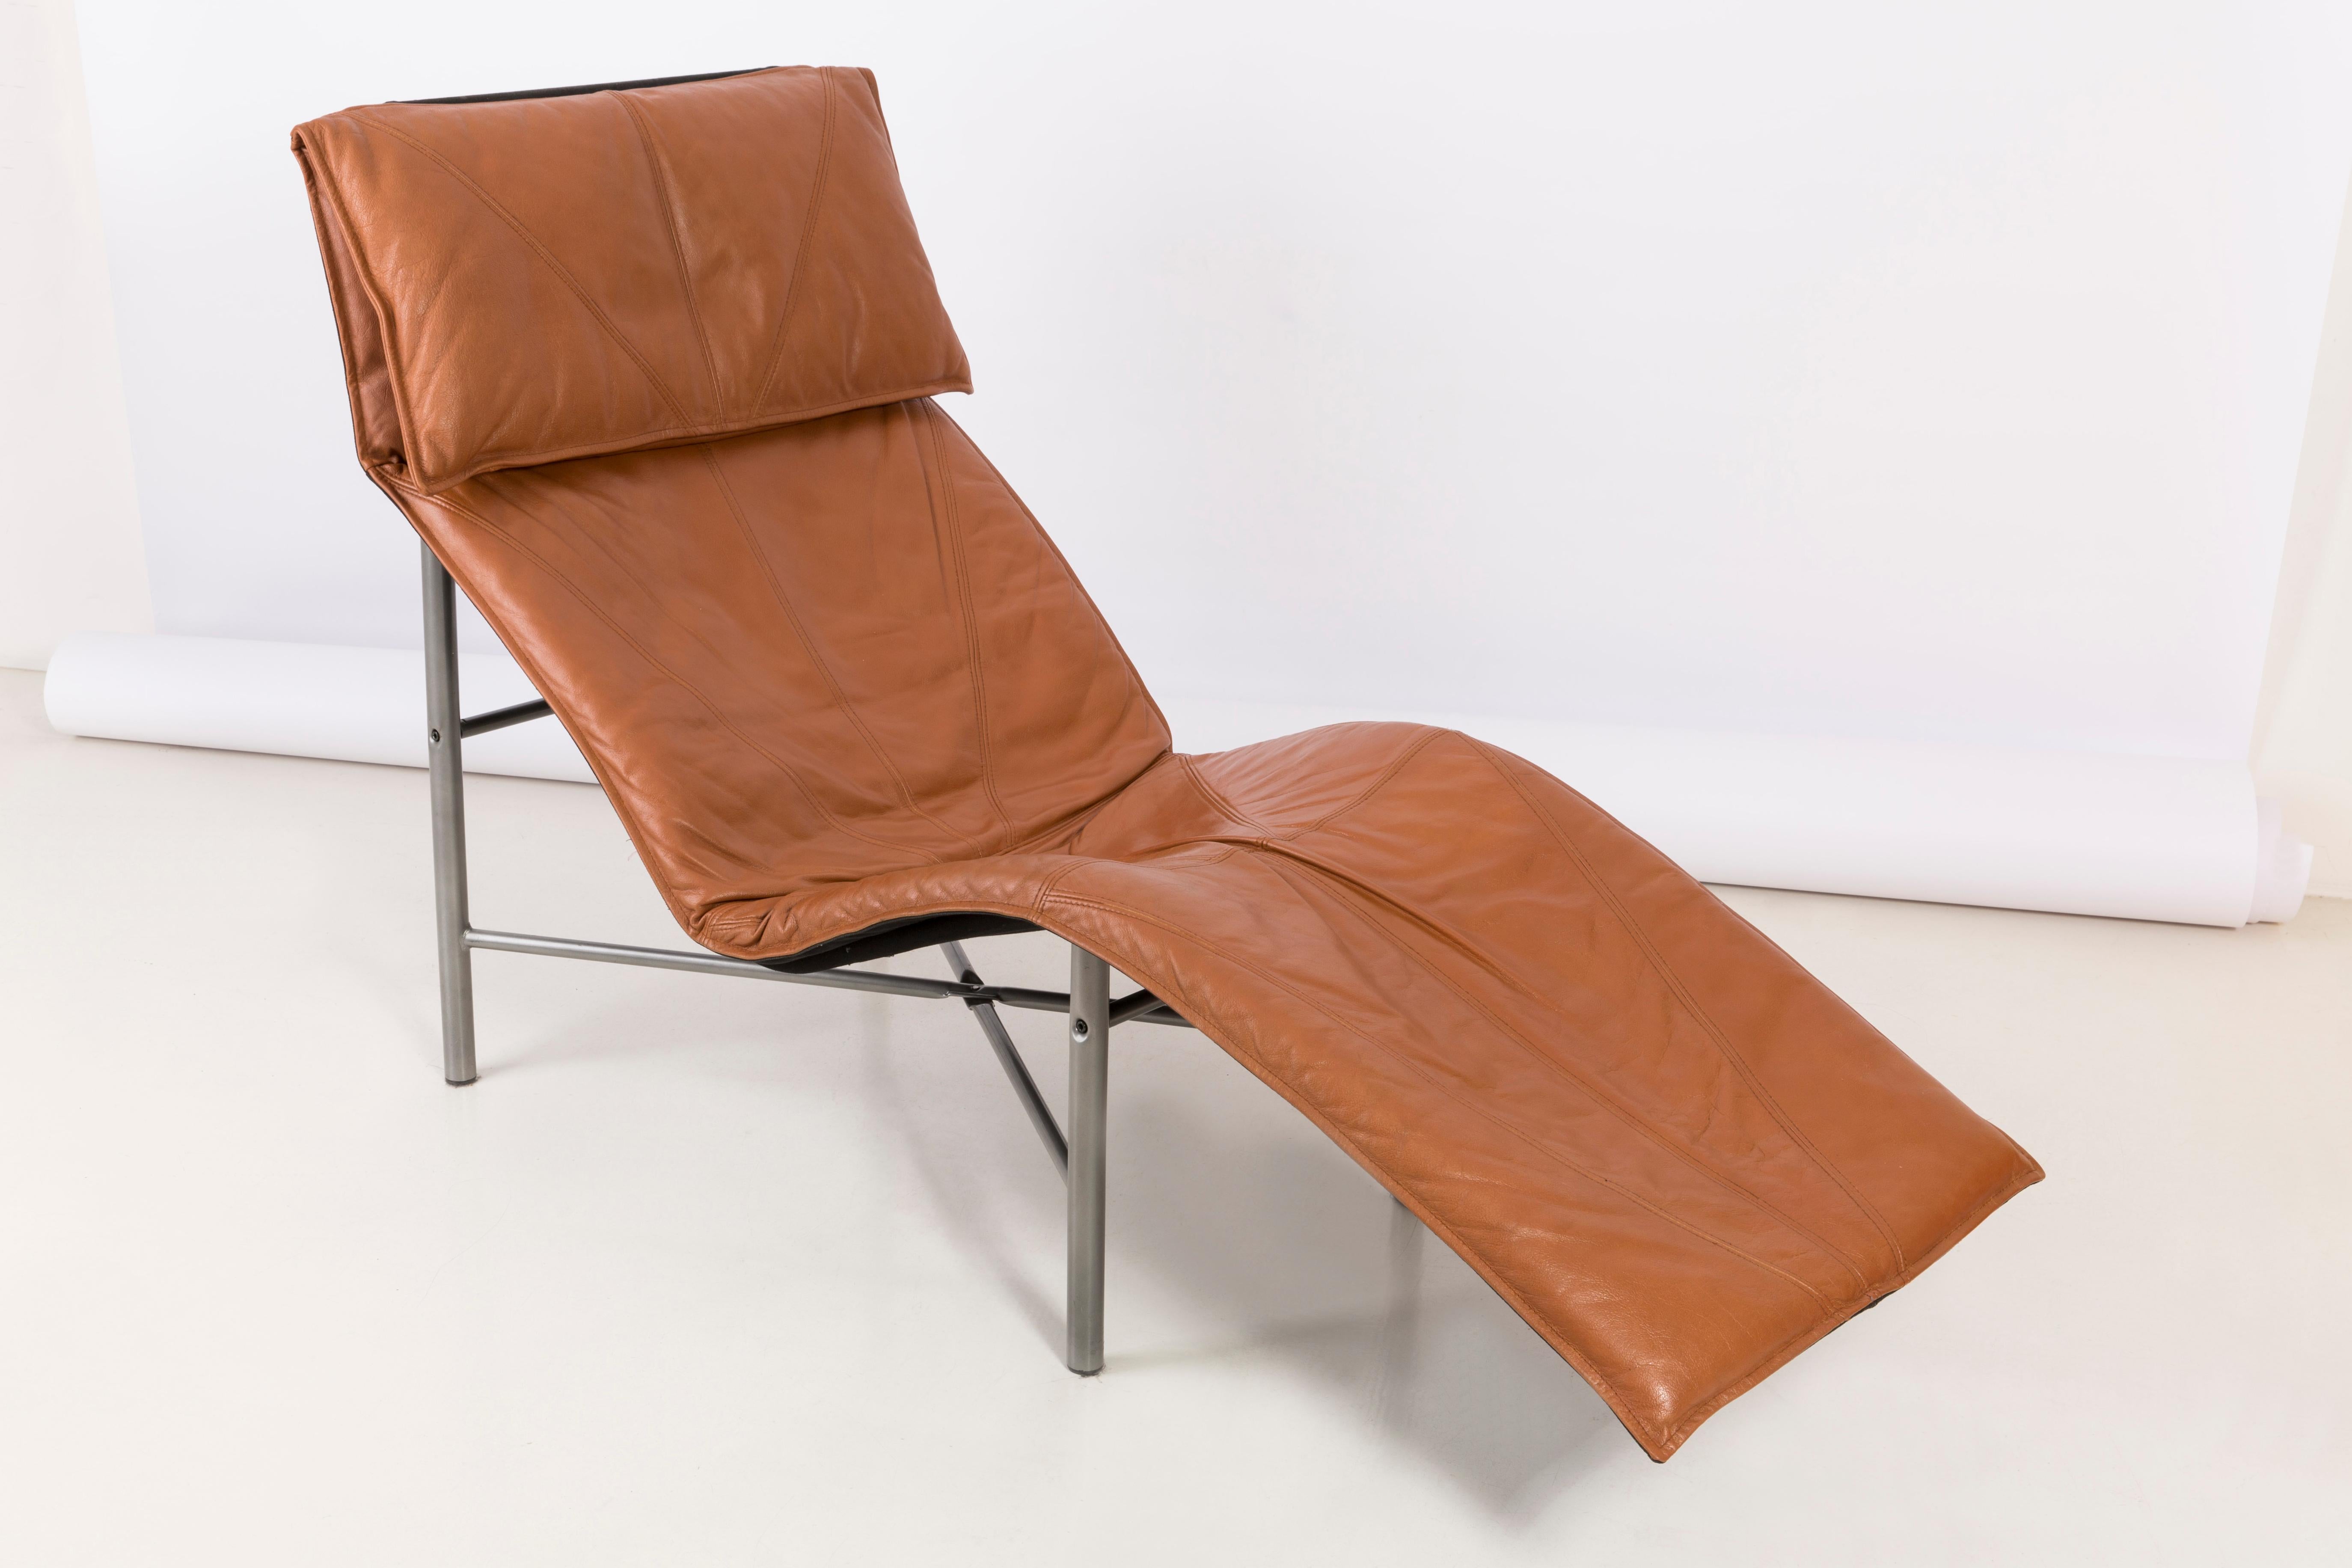 Swedish Two Midcentury Danish Modern Leather Chaise Lounge Chairs, Tord Björklund, 1980 For Sale